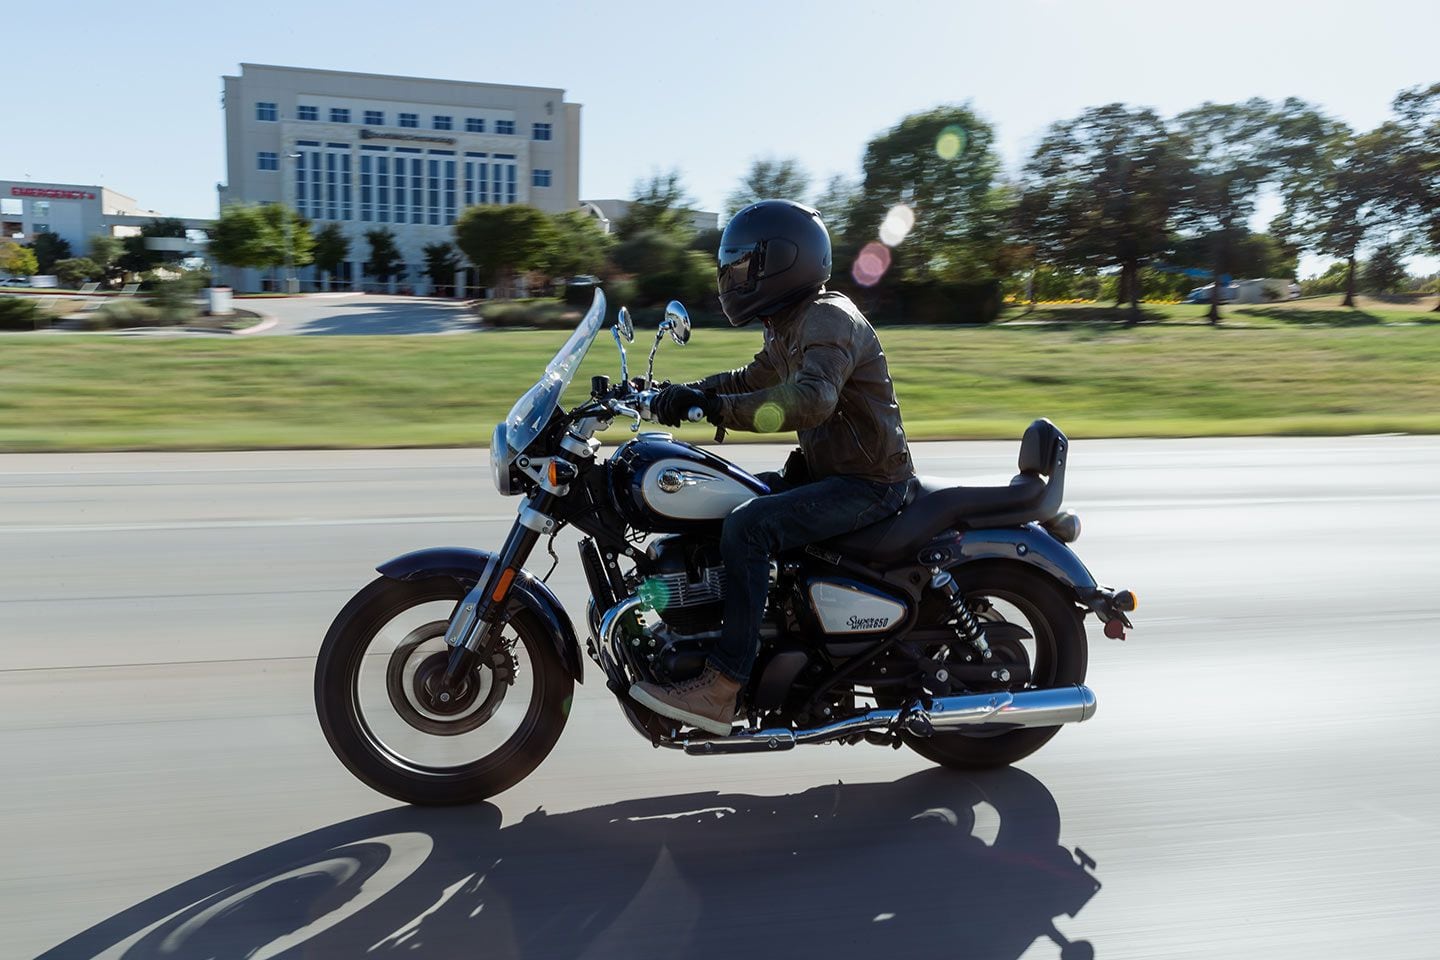 Whether your journey takes you across town or across the county, the Super Meteor 650 is comfortable for miles on end.